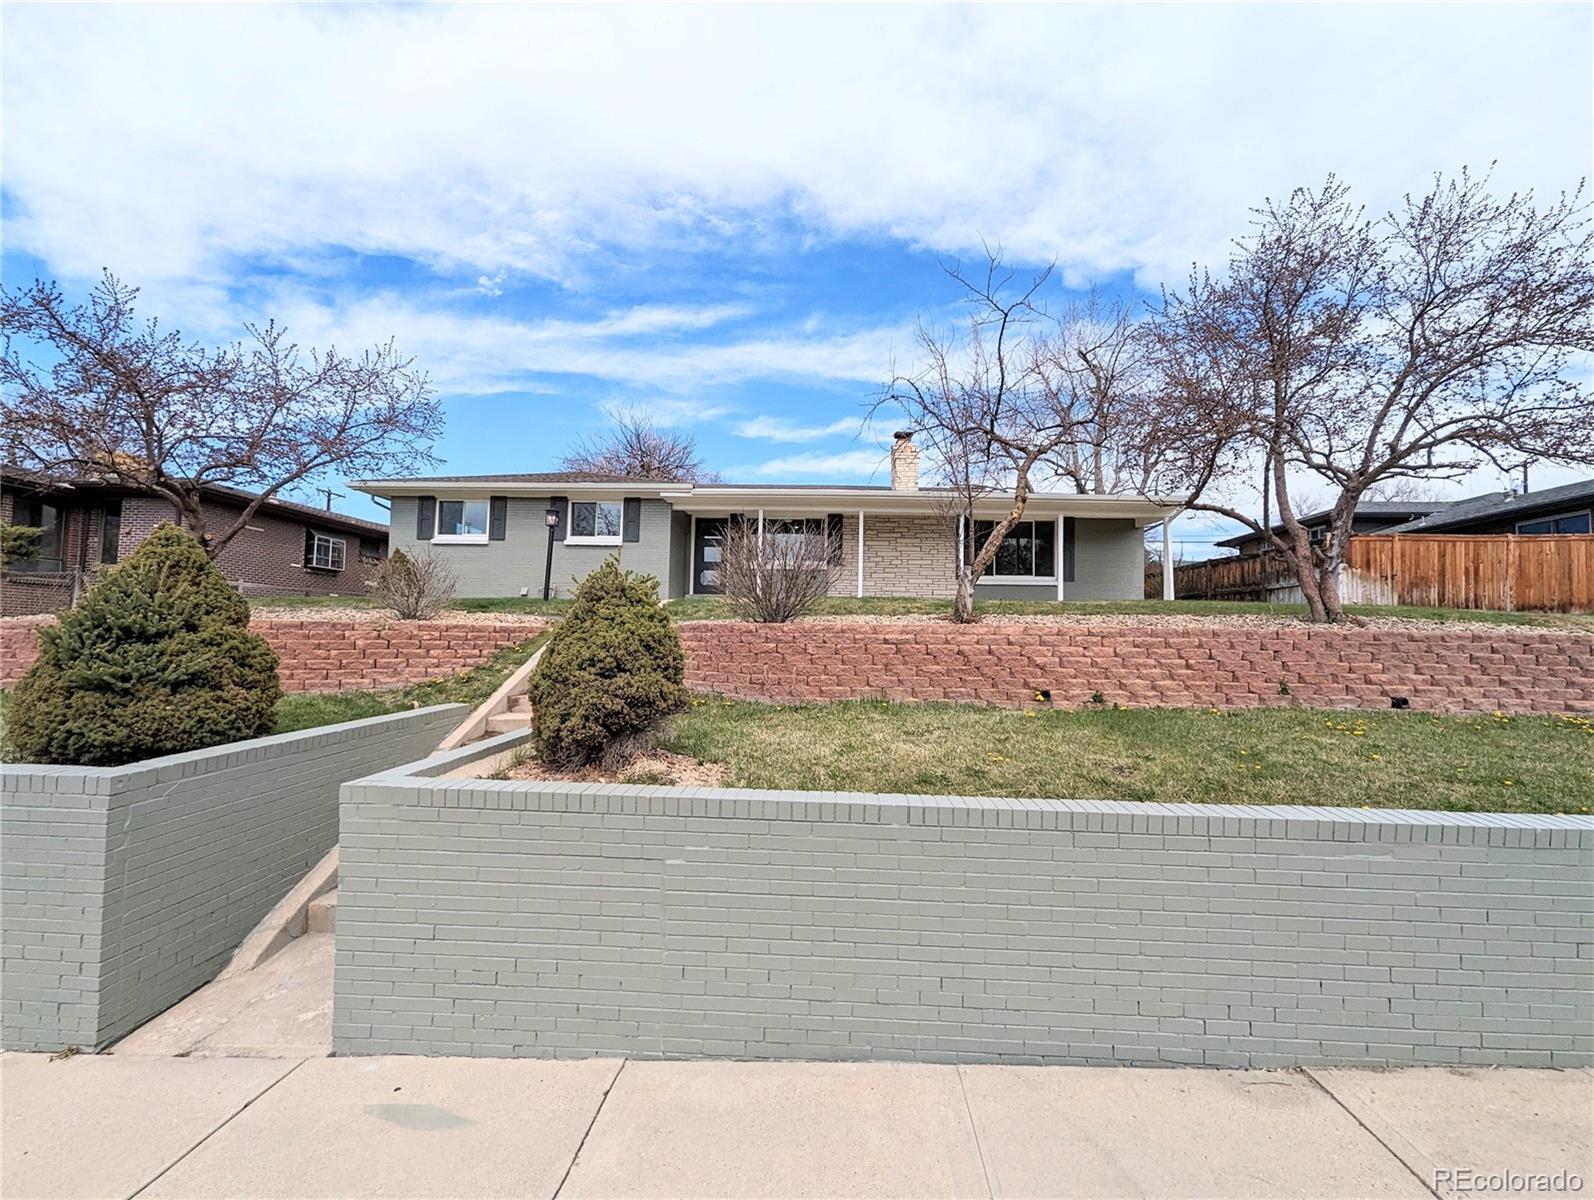 Report Image for 685 W Midway Boulevard,Broomfield, Colorado